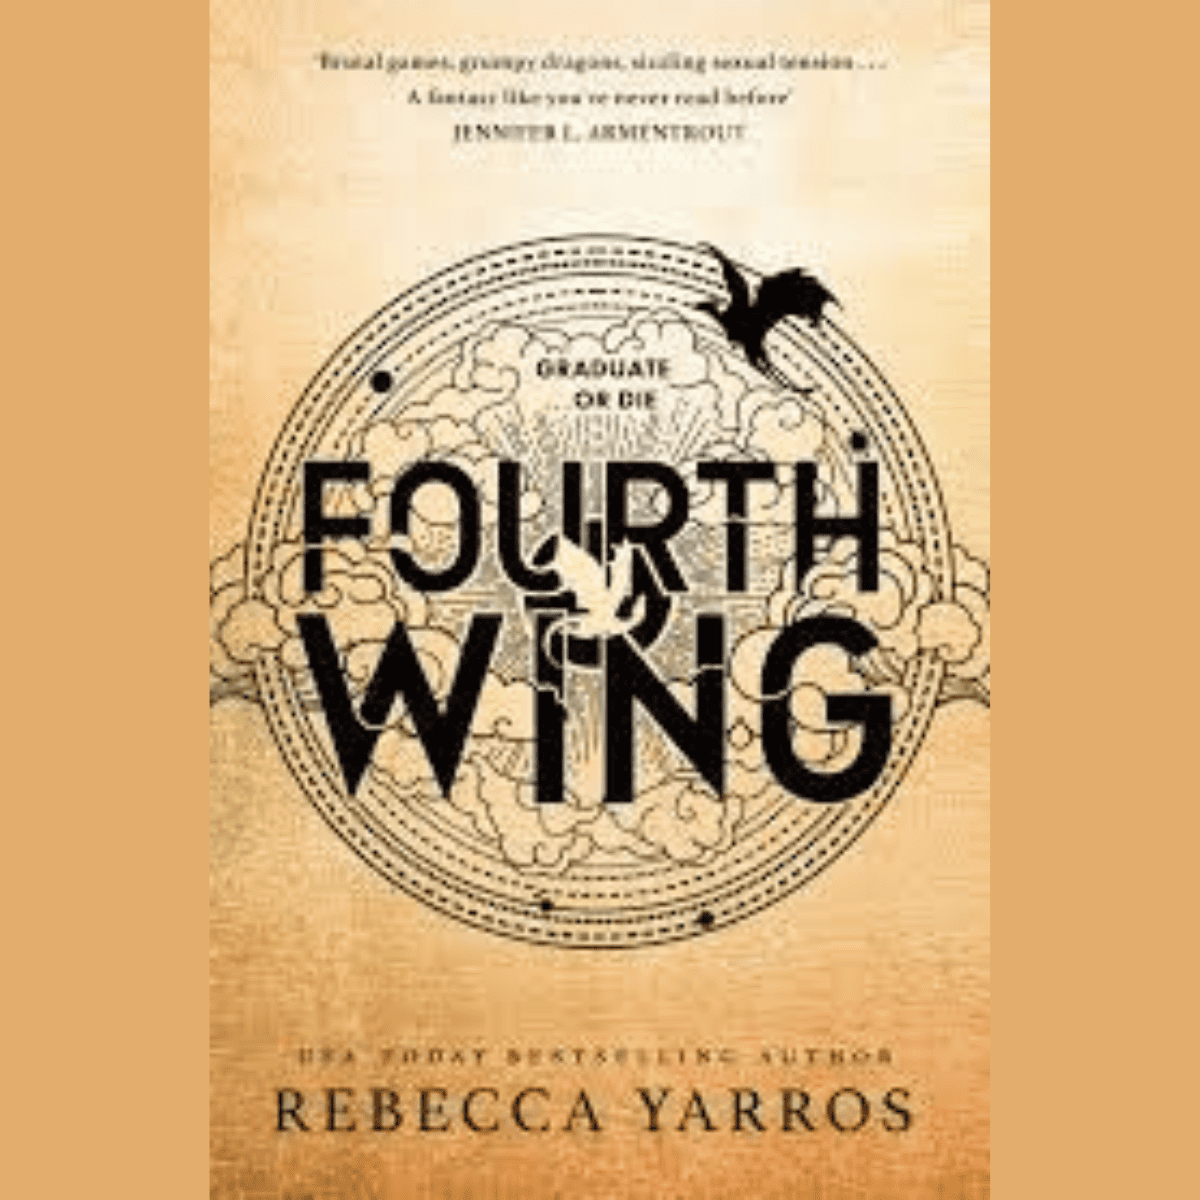 fourth wing by rebecca yarros.